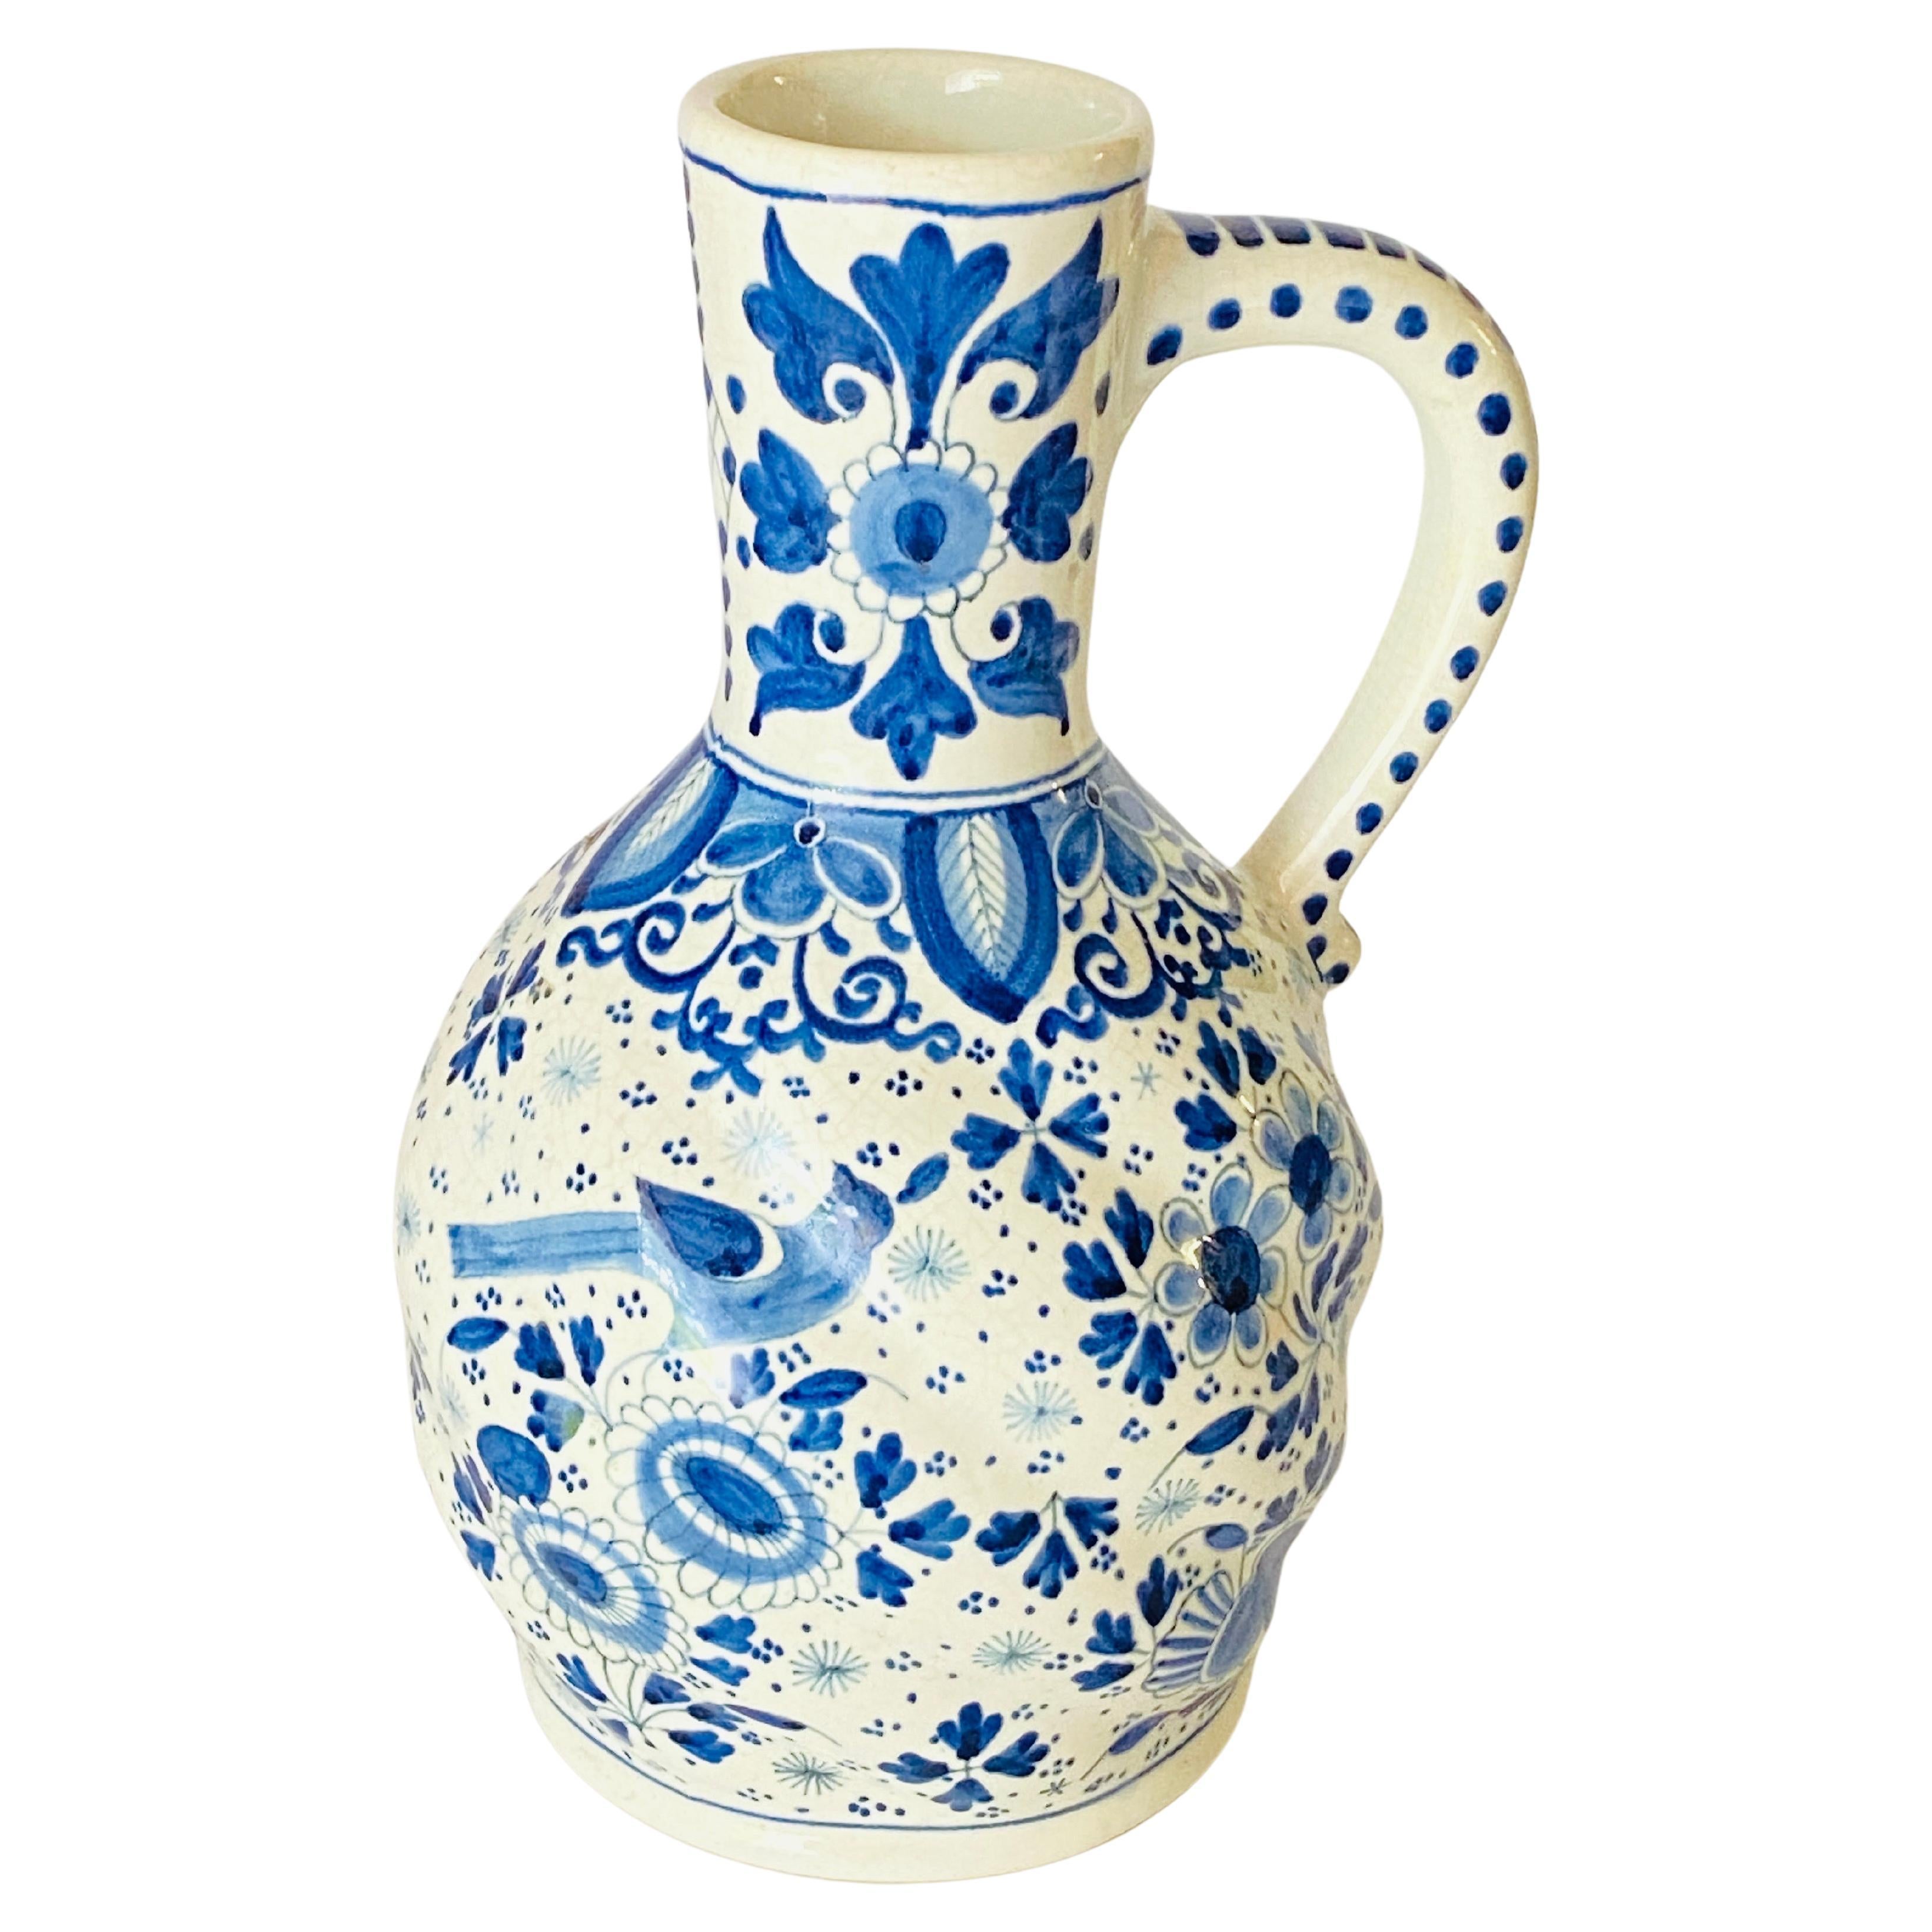 Delft Jug in Faïence, White and Blue, 19th Century Netherlands